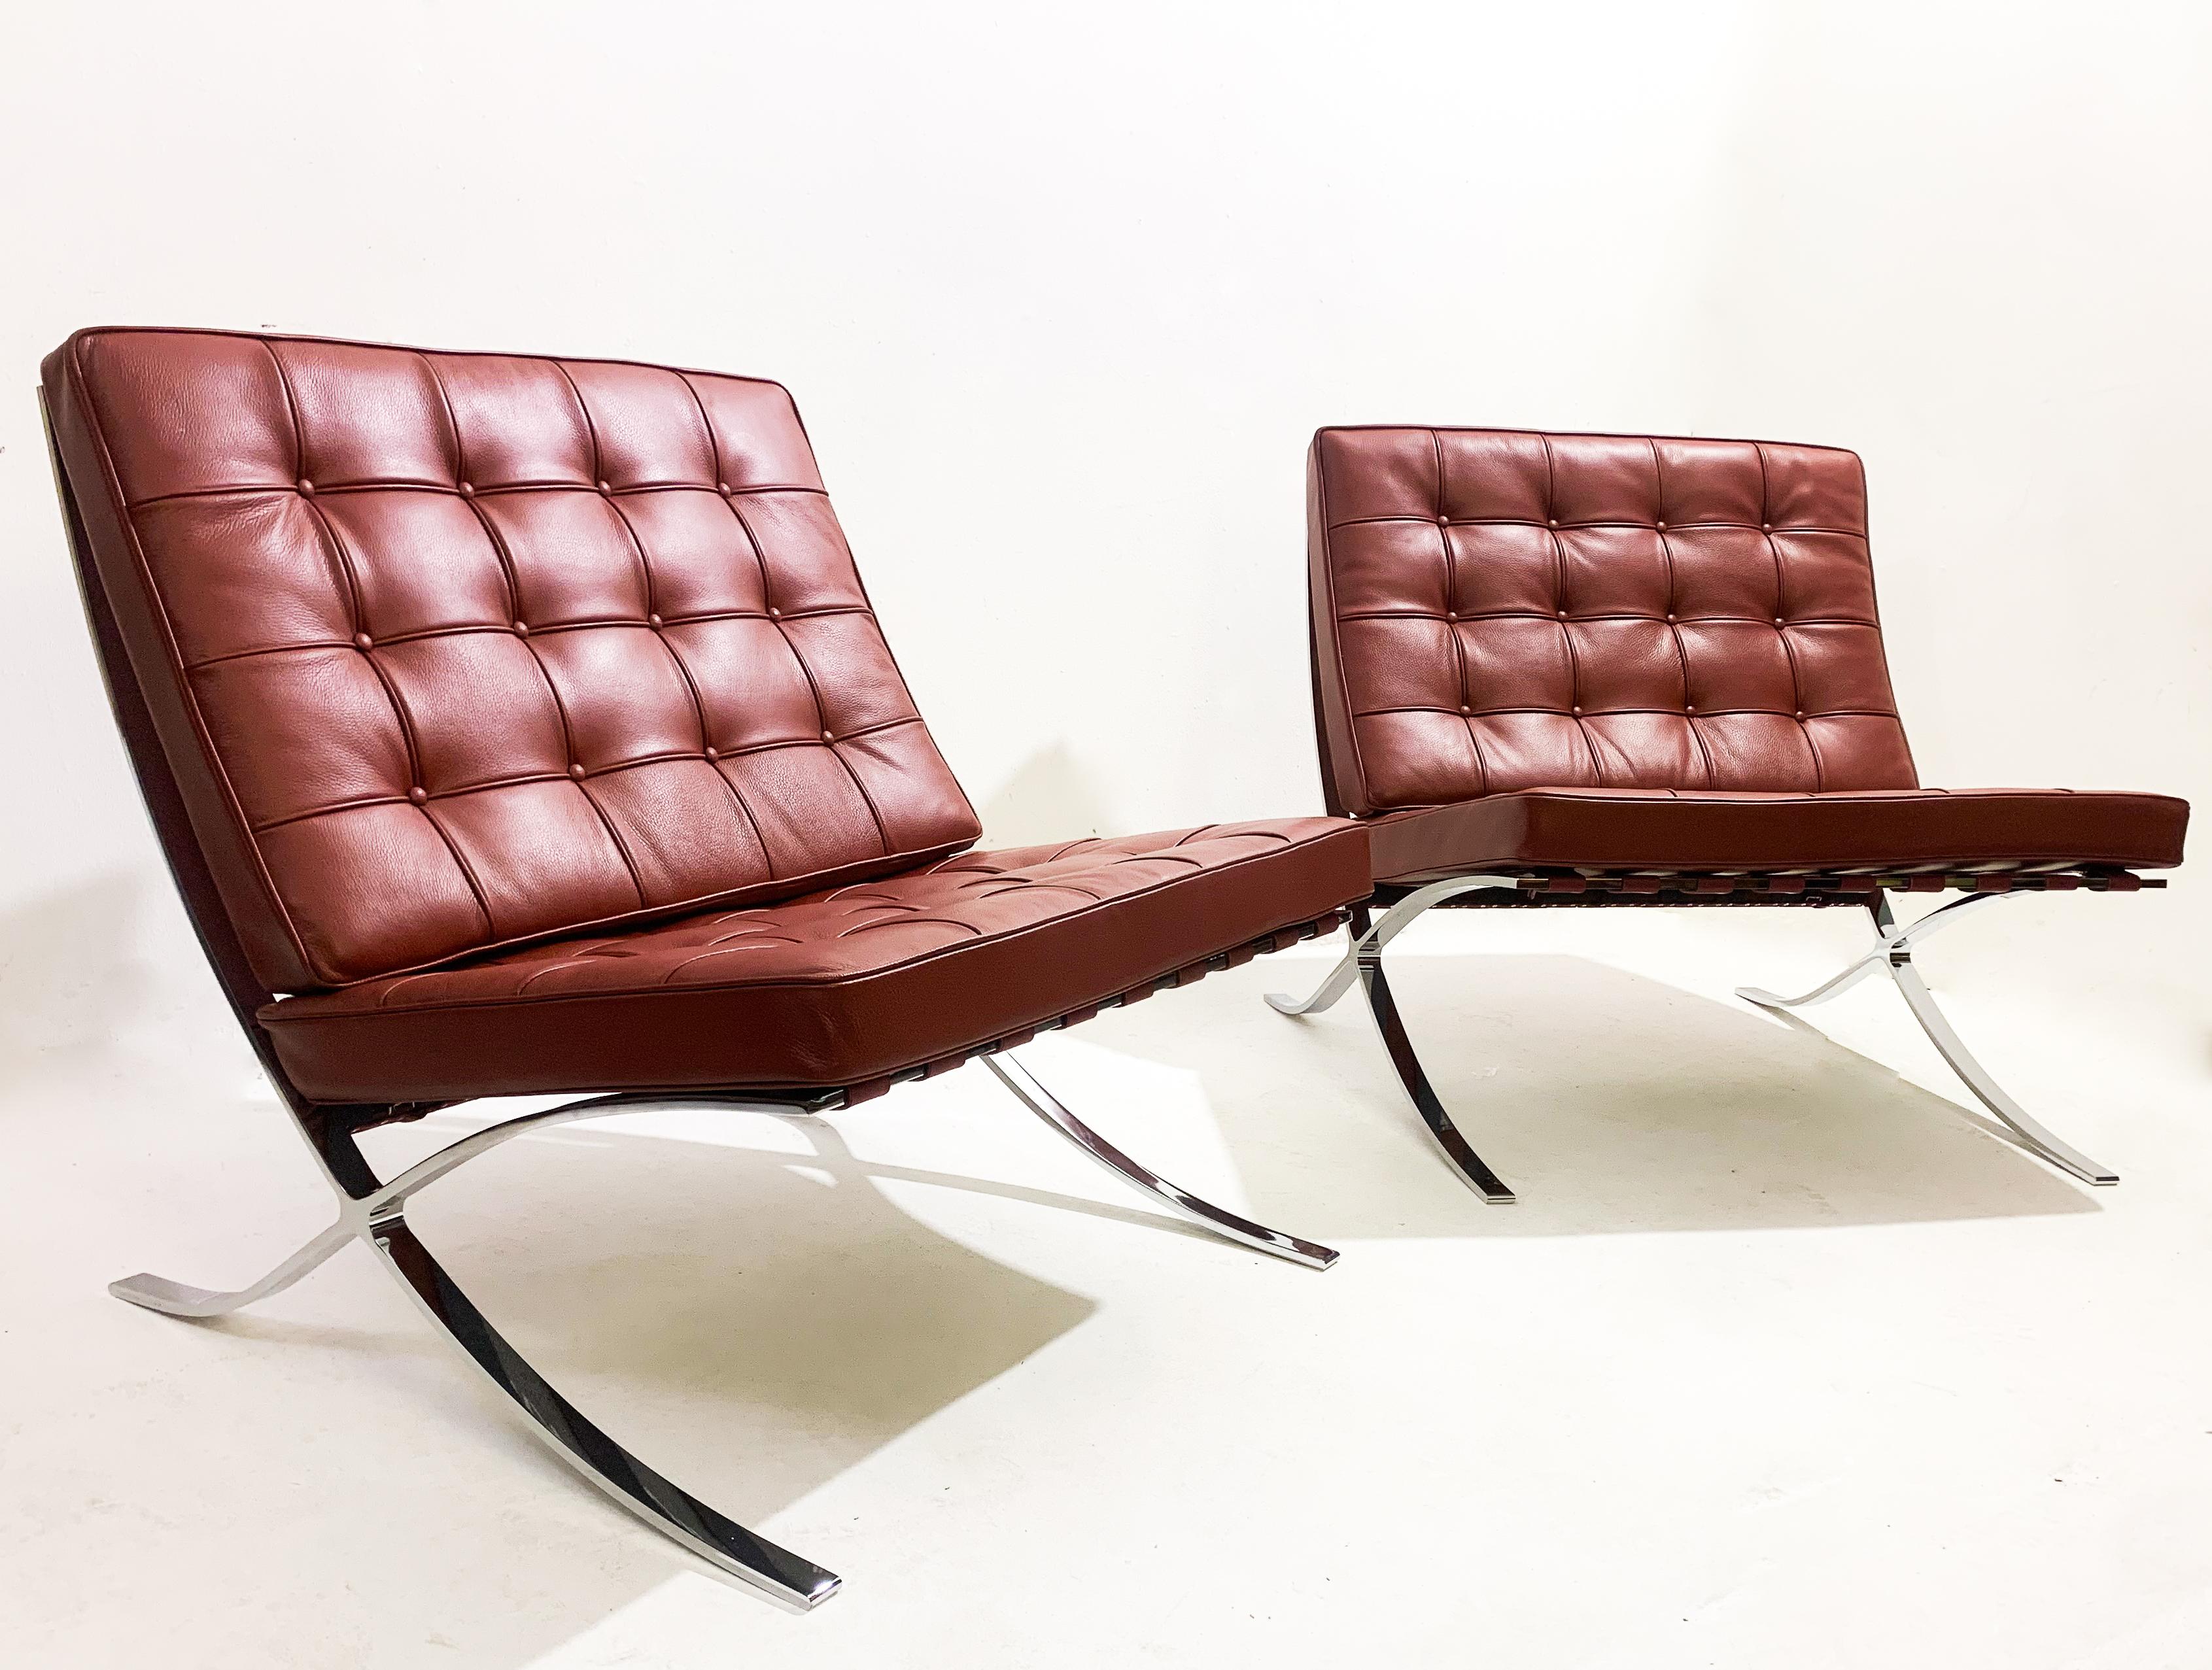 Pair of Burgundy Leather Barcelona Chairs by Mies Van Der Rohe for Knoll, 1990s For Sale 4